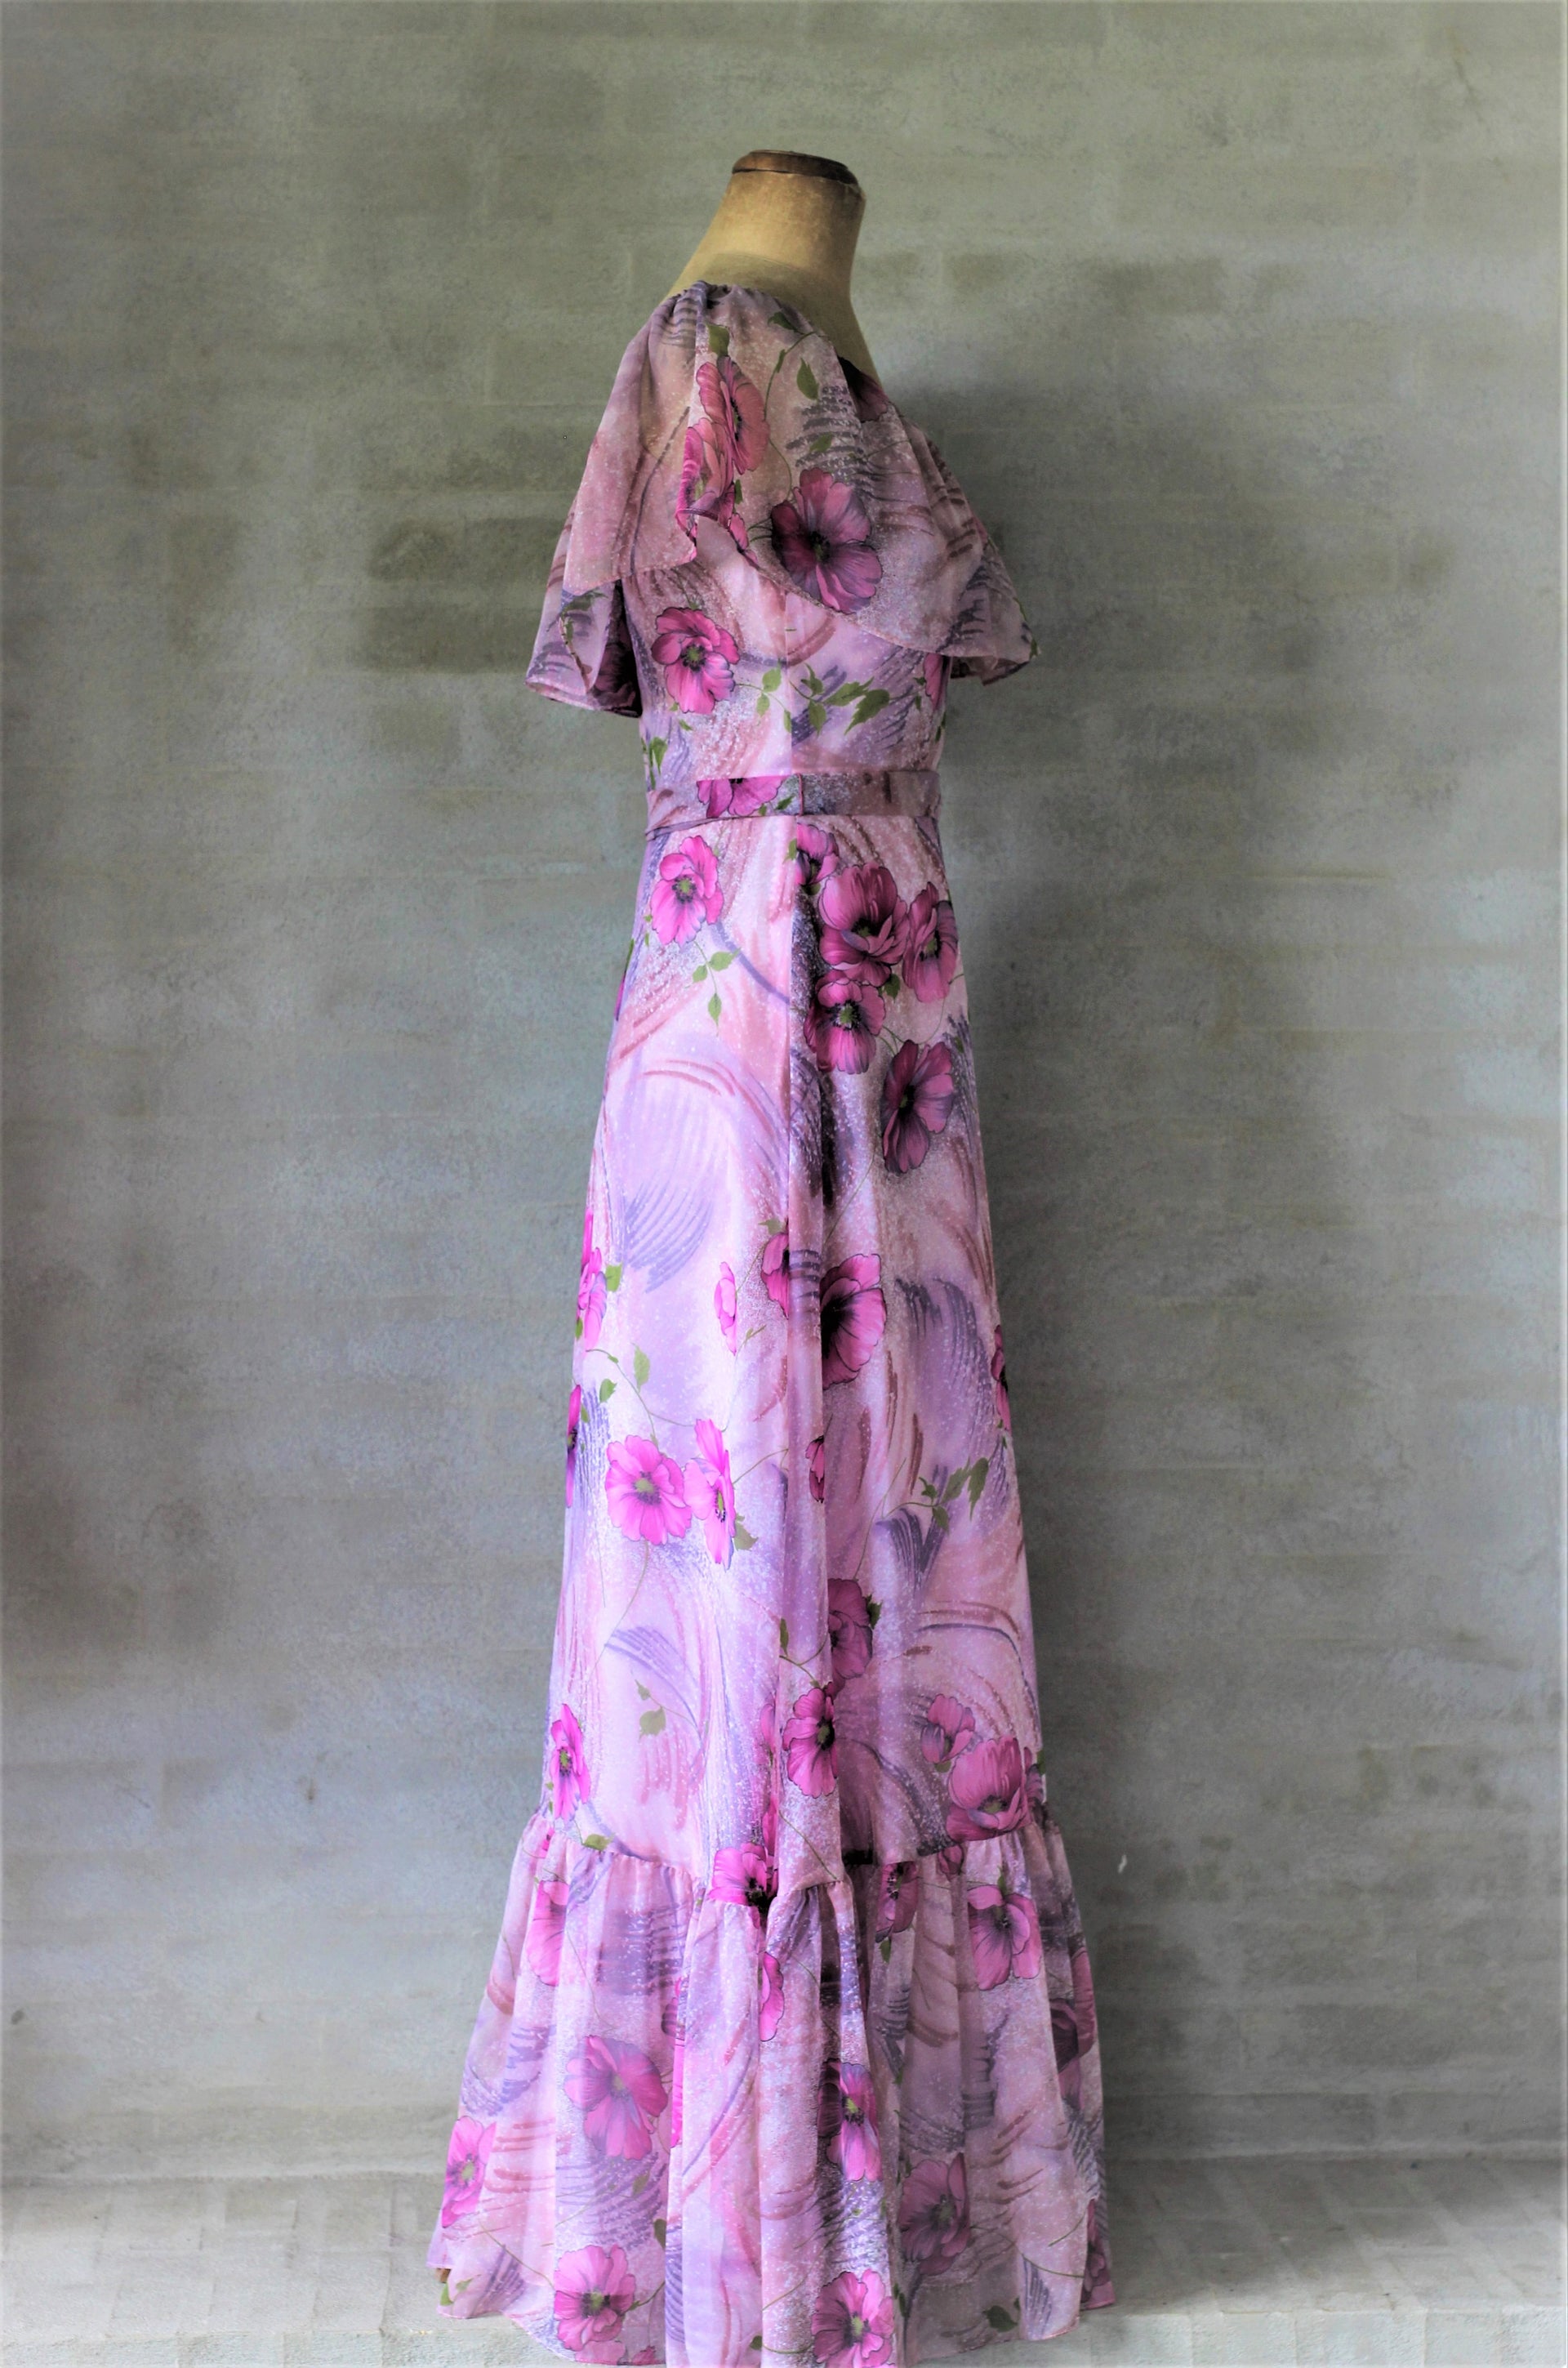 1960s Maxi Dress with Floral Print//Size S